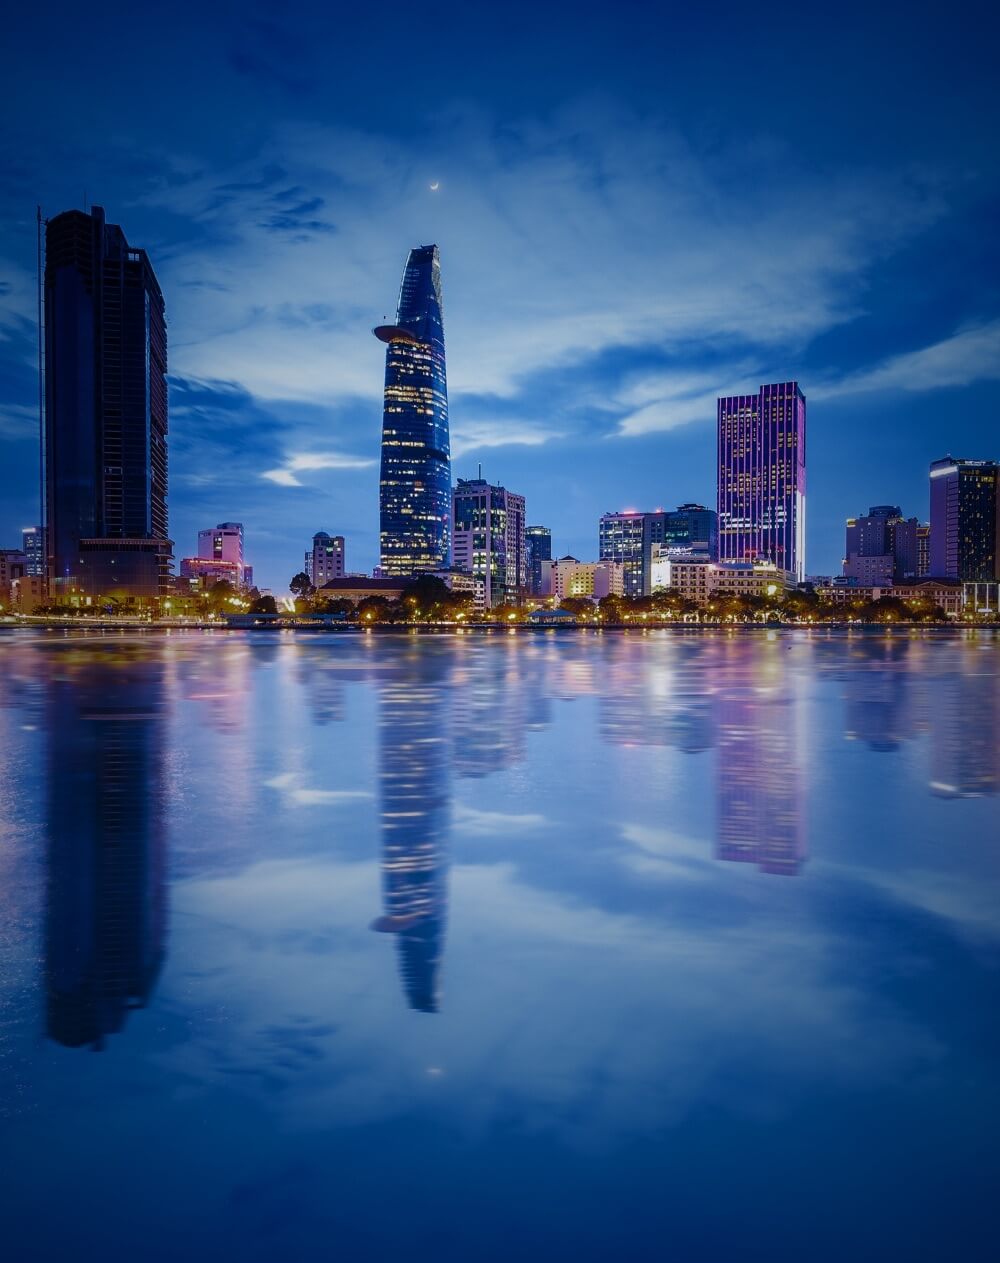 landscape night photo showing saigon business center and bitexco with their reflection on the river